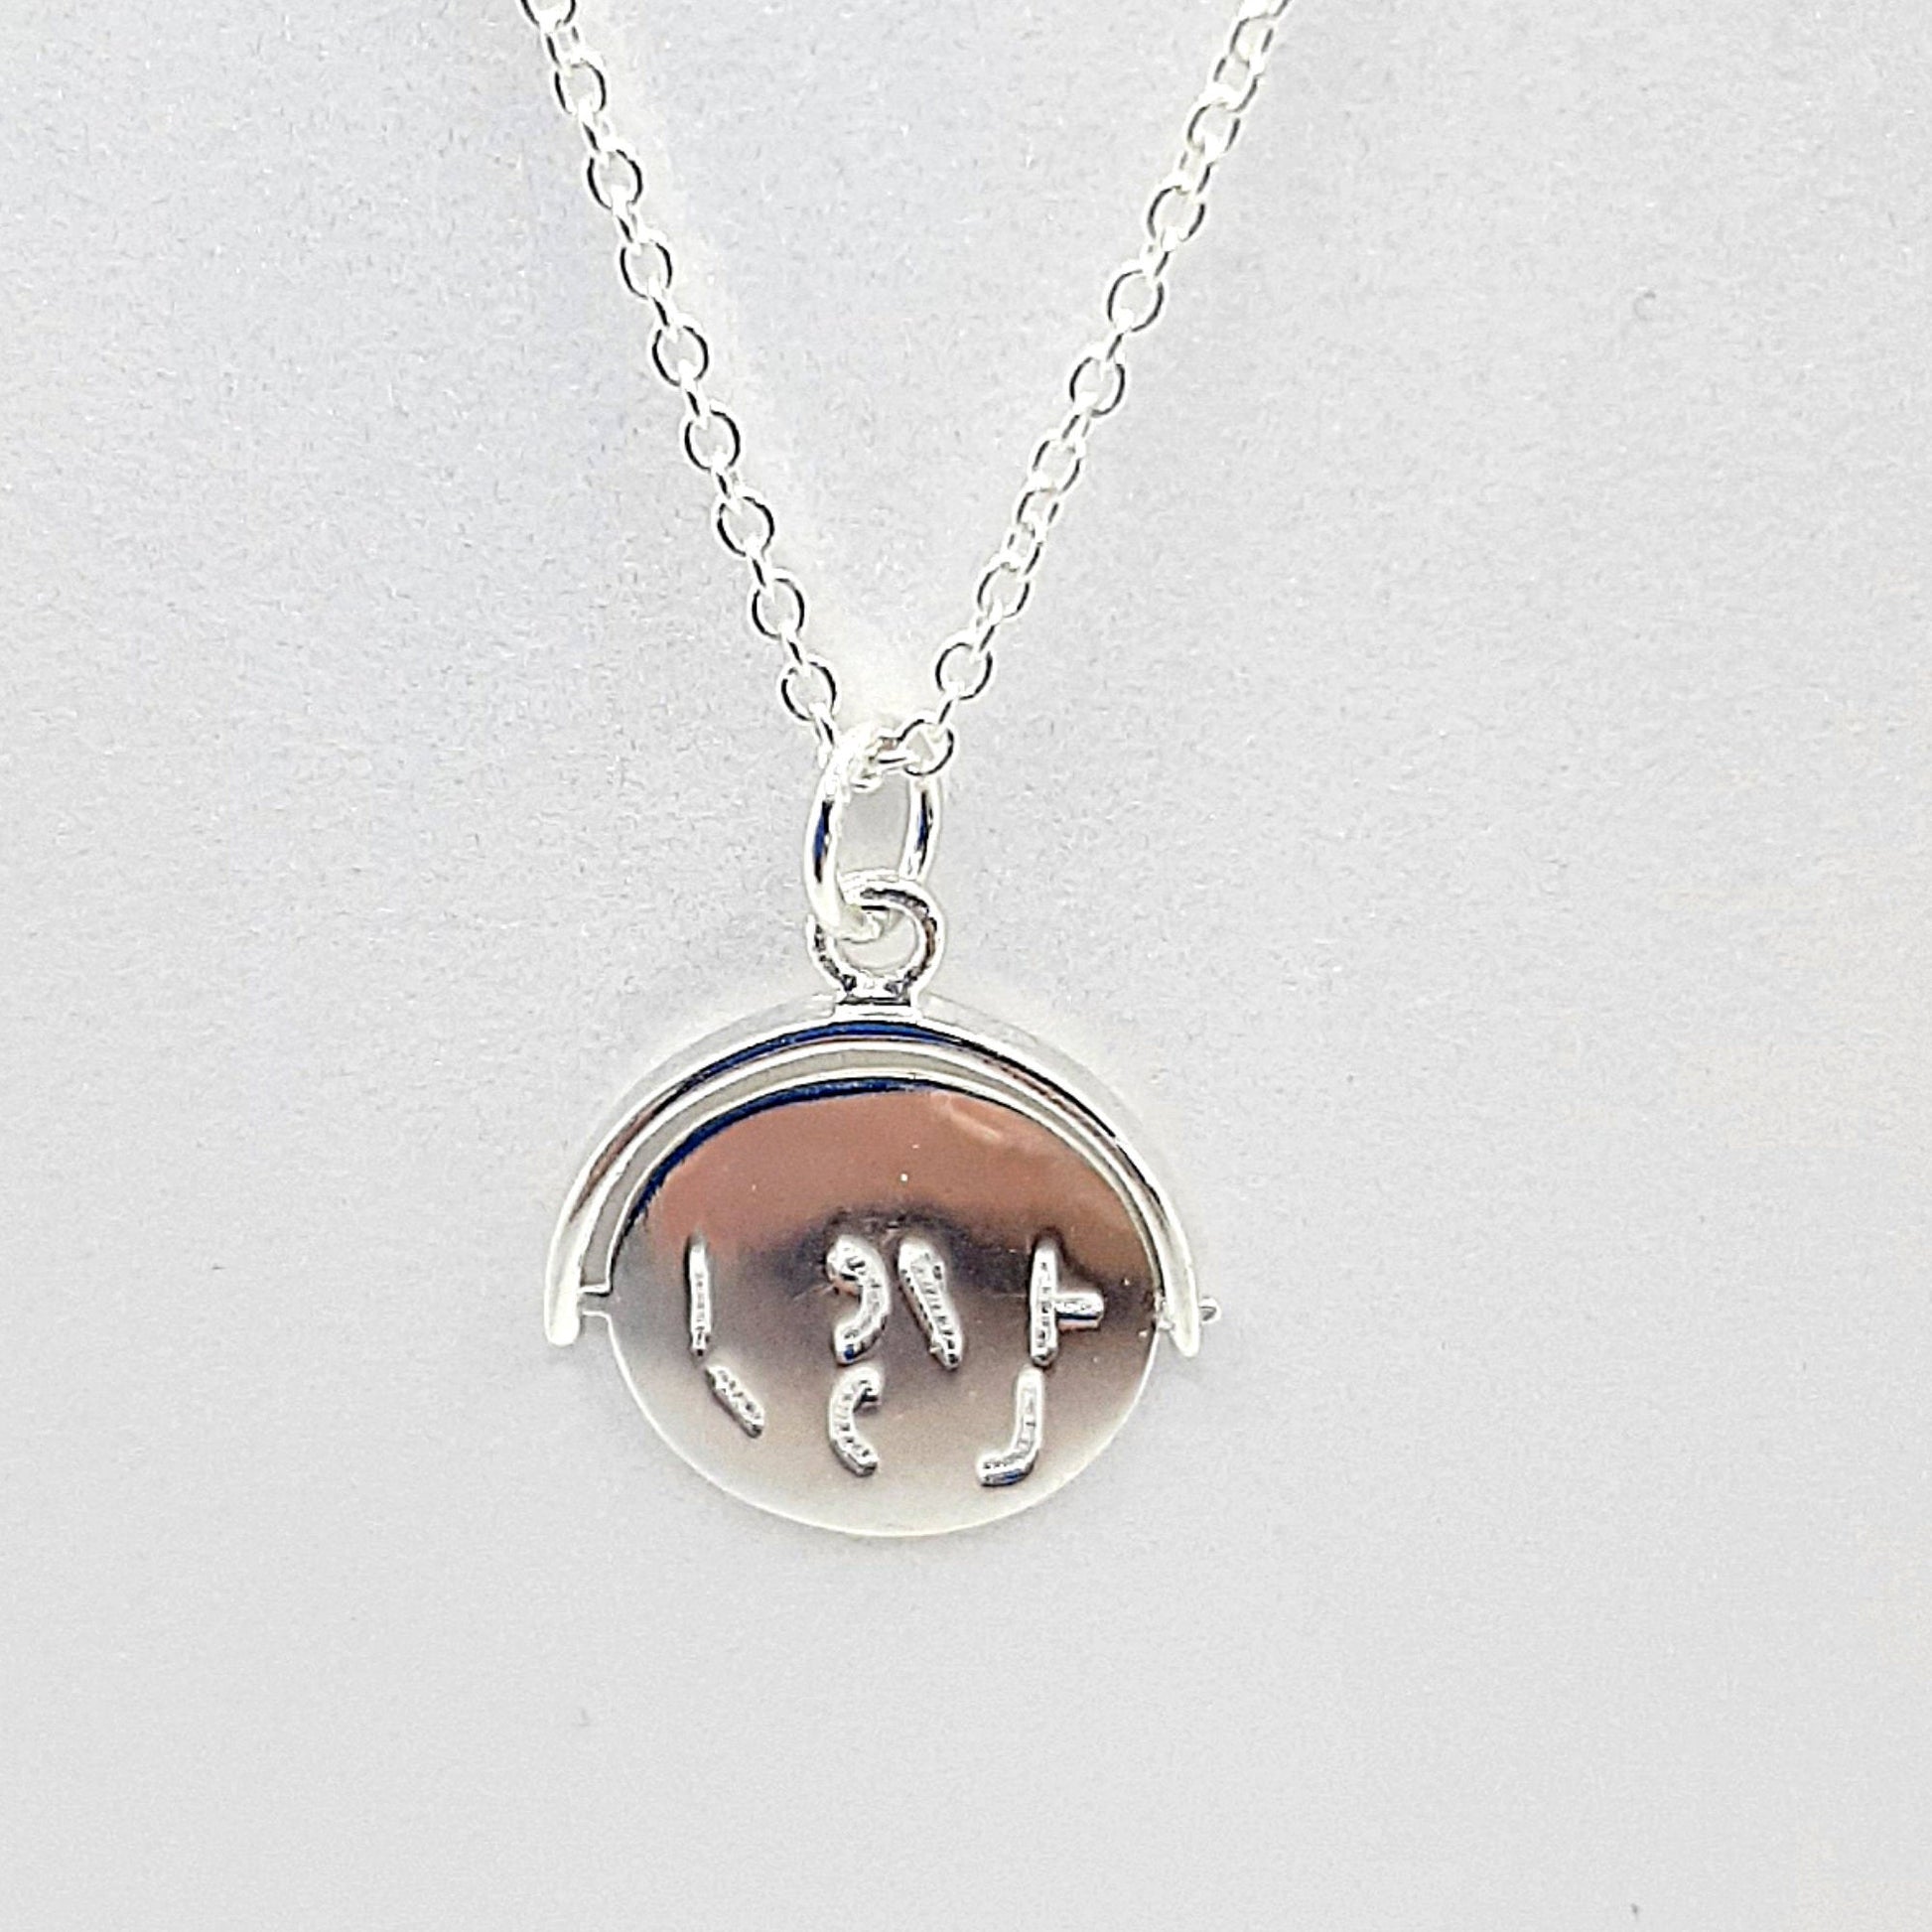 I Love You Necklace, Spinning Charm